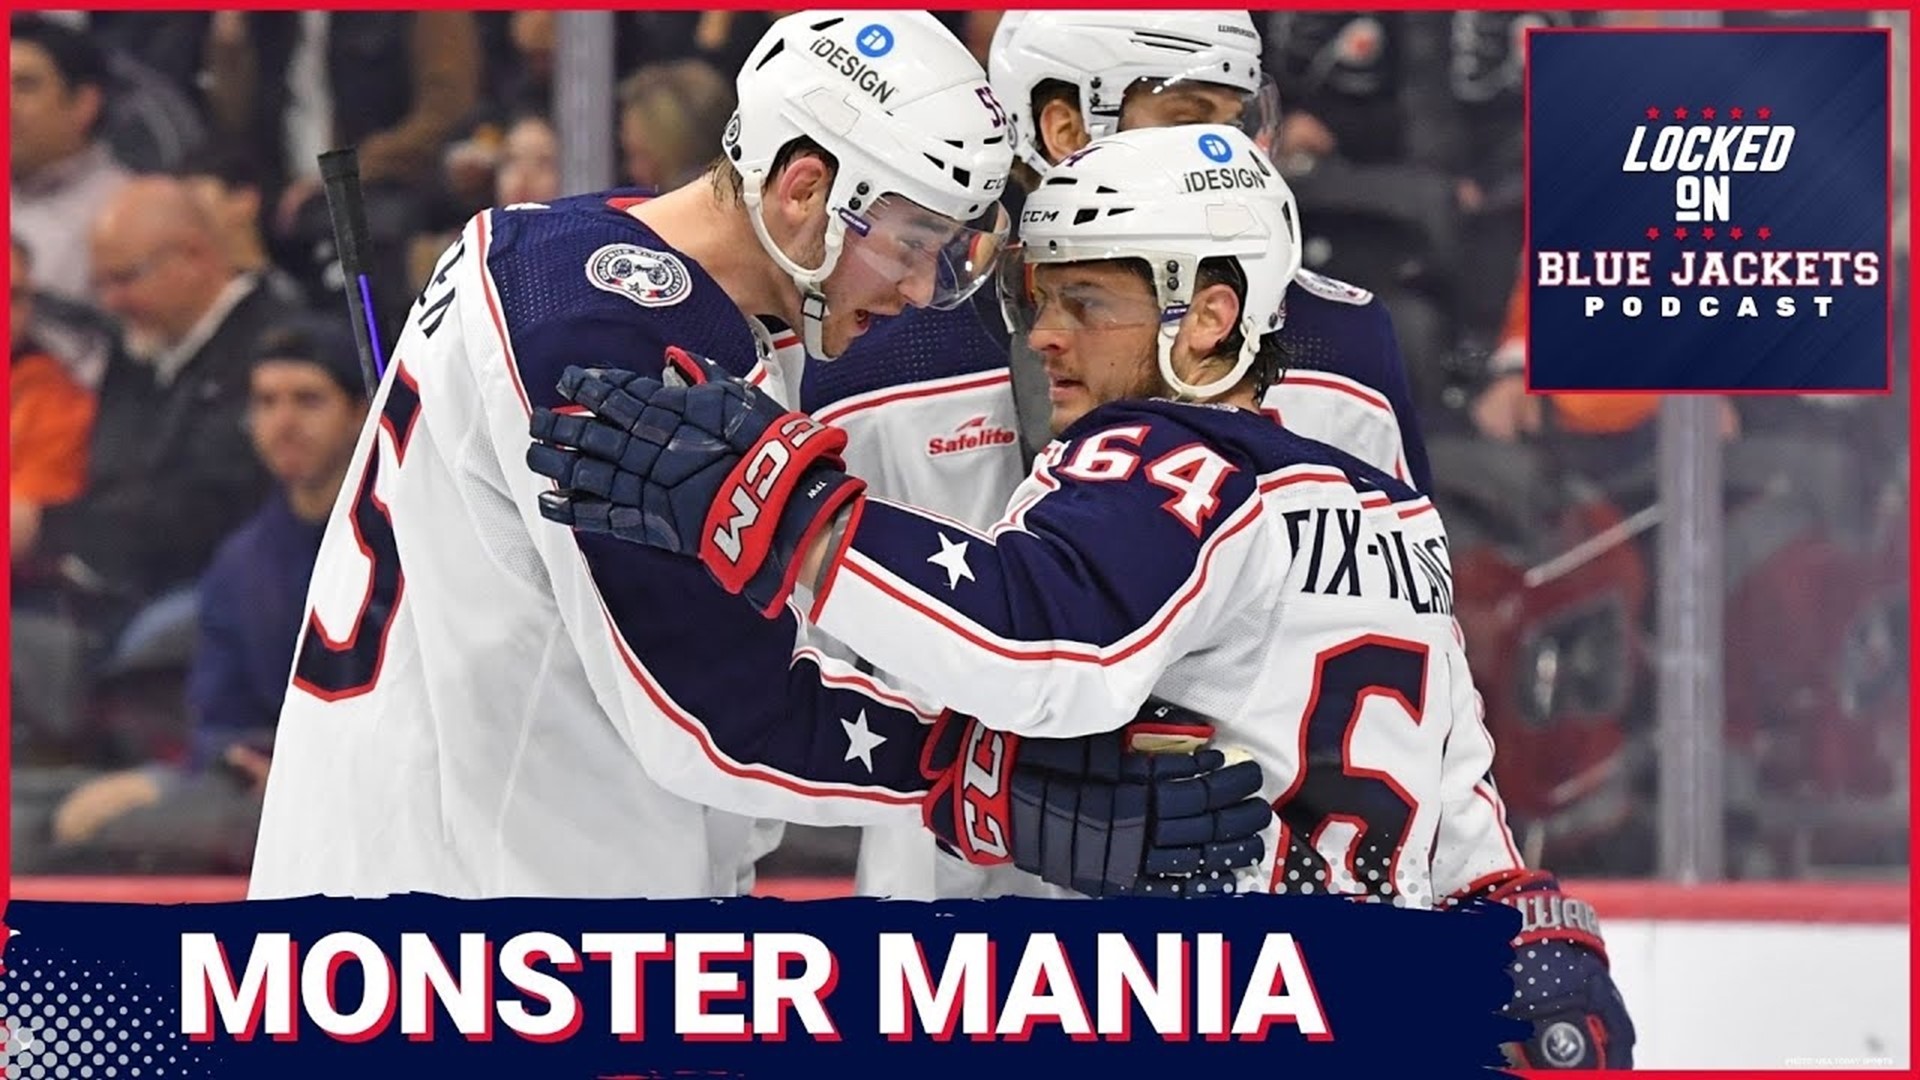 We thought it was about time to check in with our favourite AHL team, the Cleveland Monsters, so we have Deana Weinheimer here from AHL News Now to talk about them!